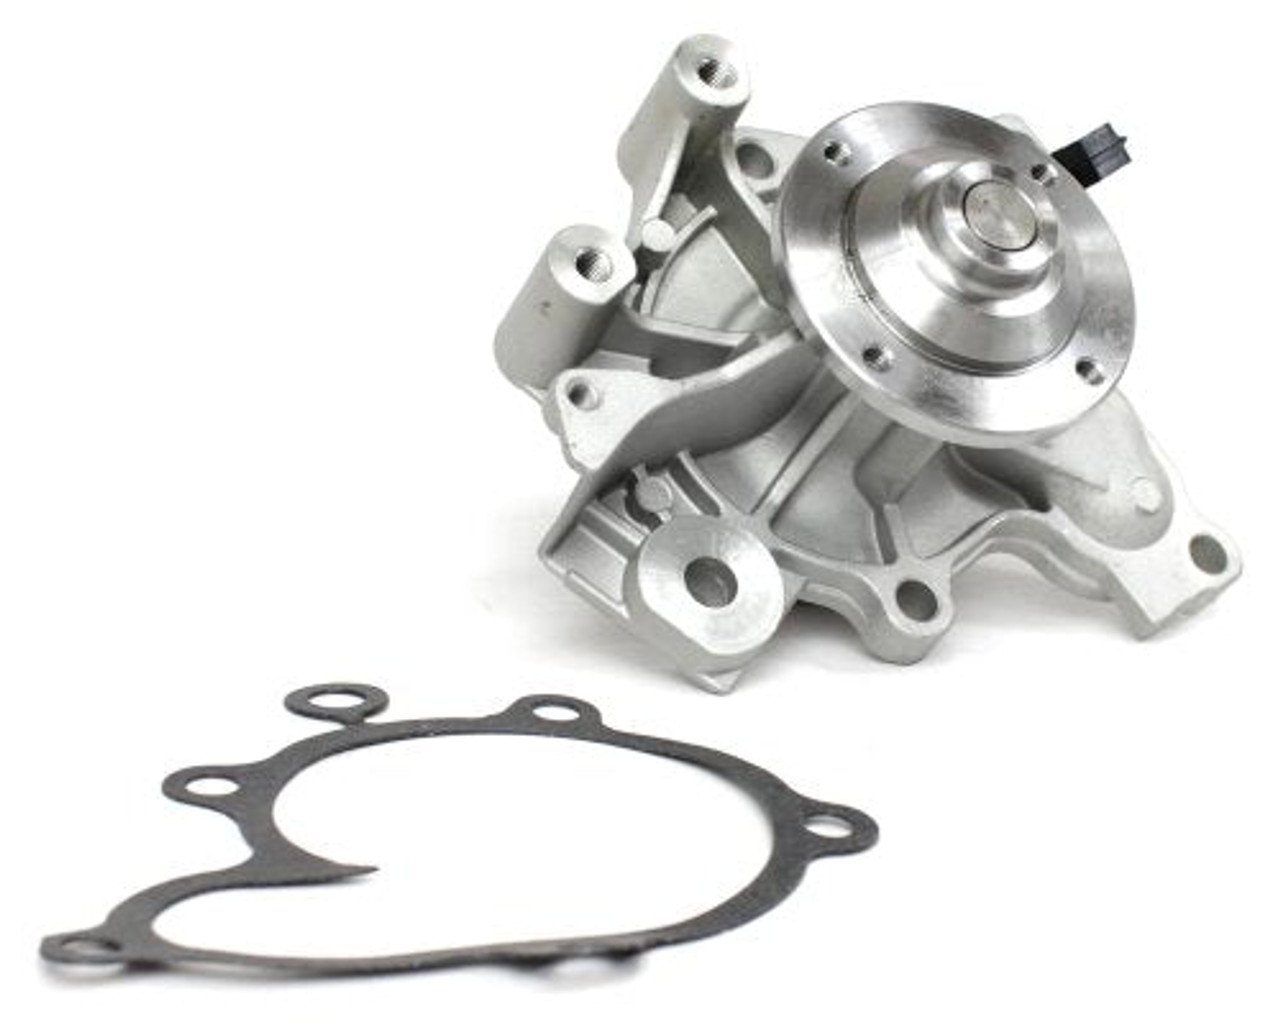 Water Pump - 1996 Ford Probe 2.0L Engine Parts # WP425ZE4